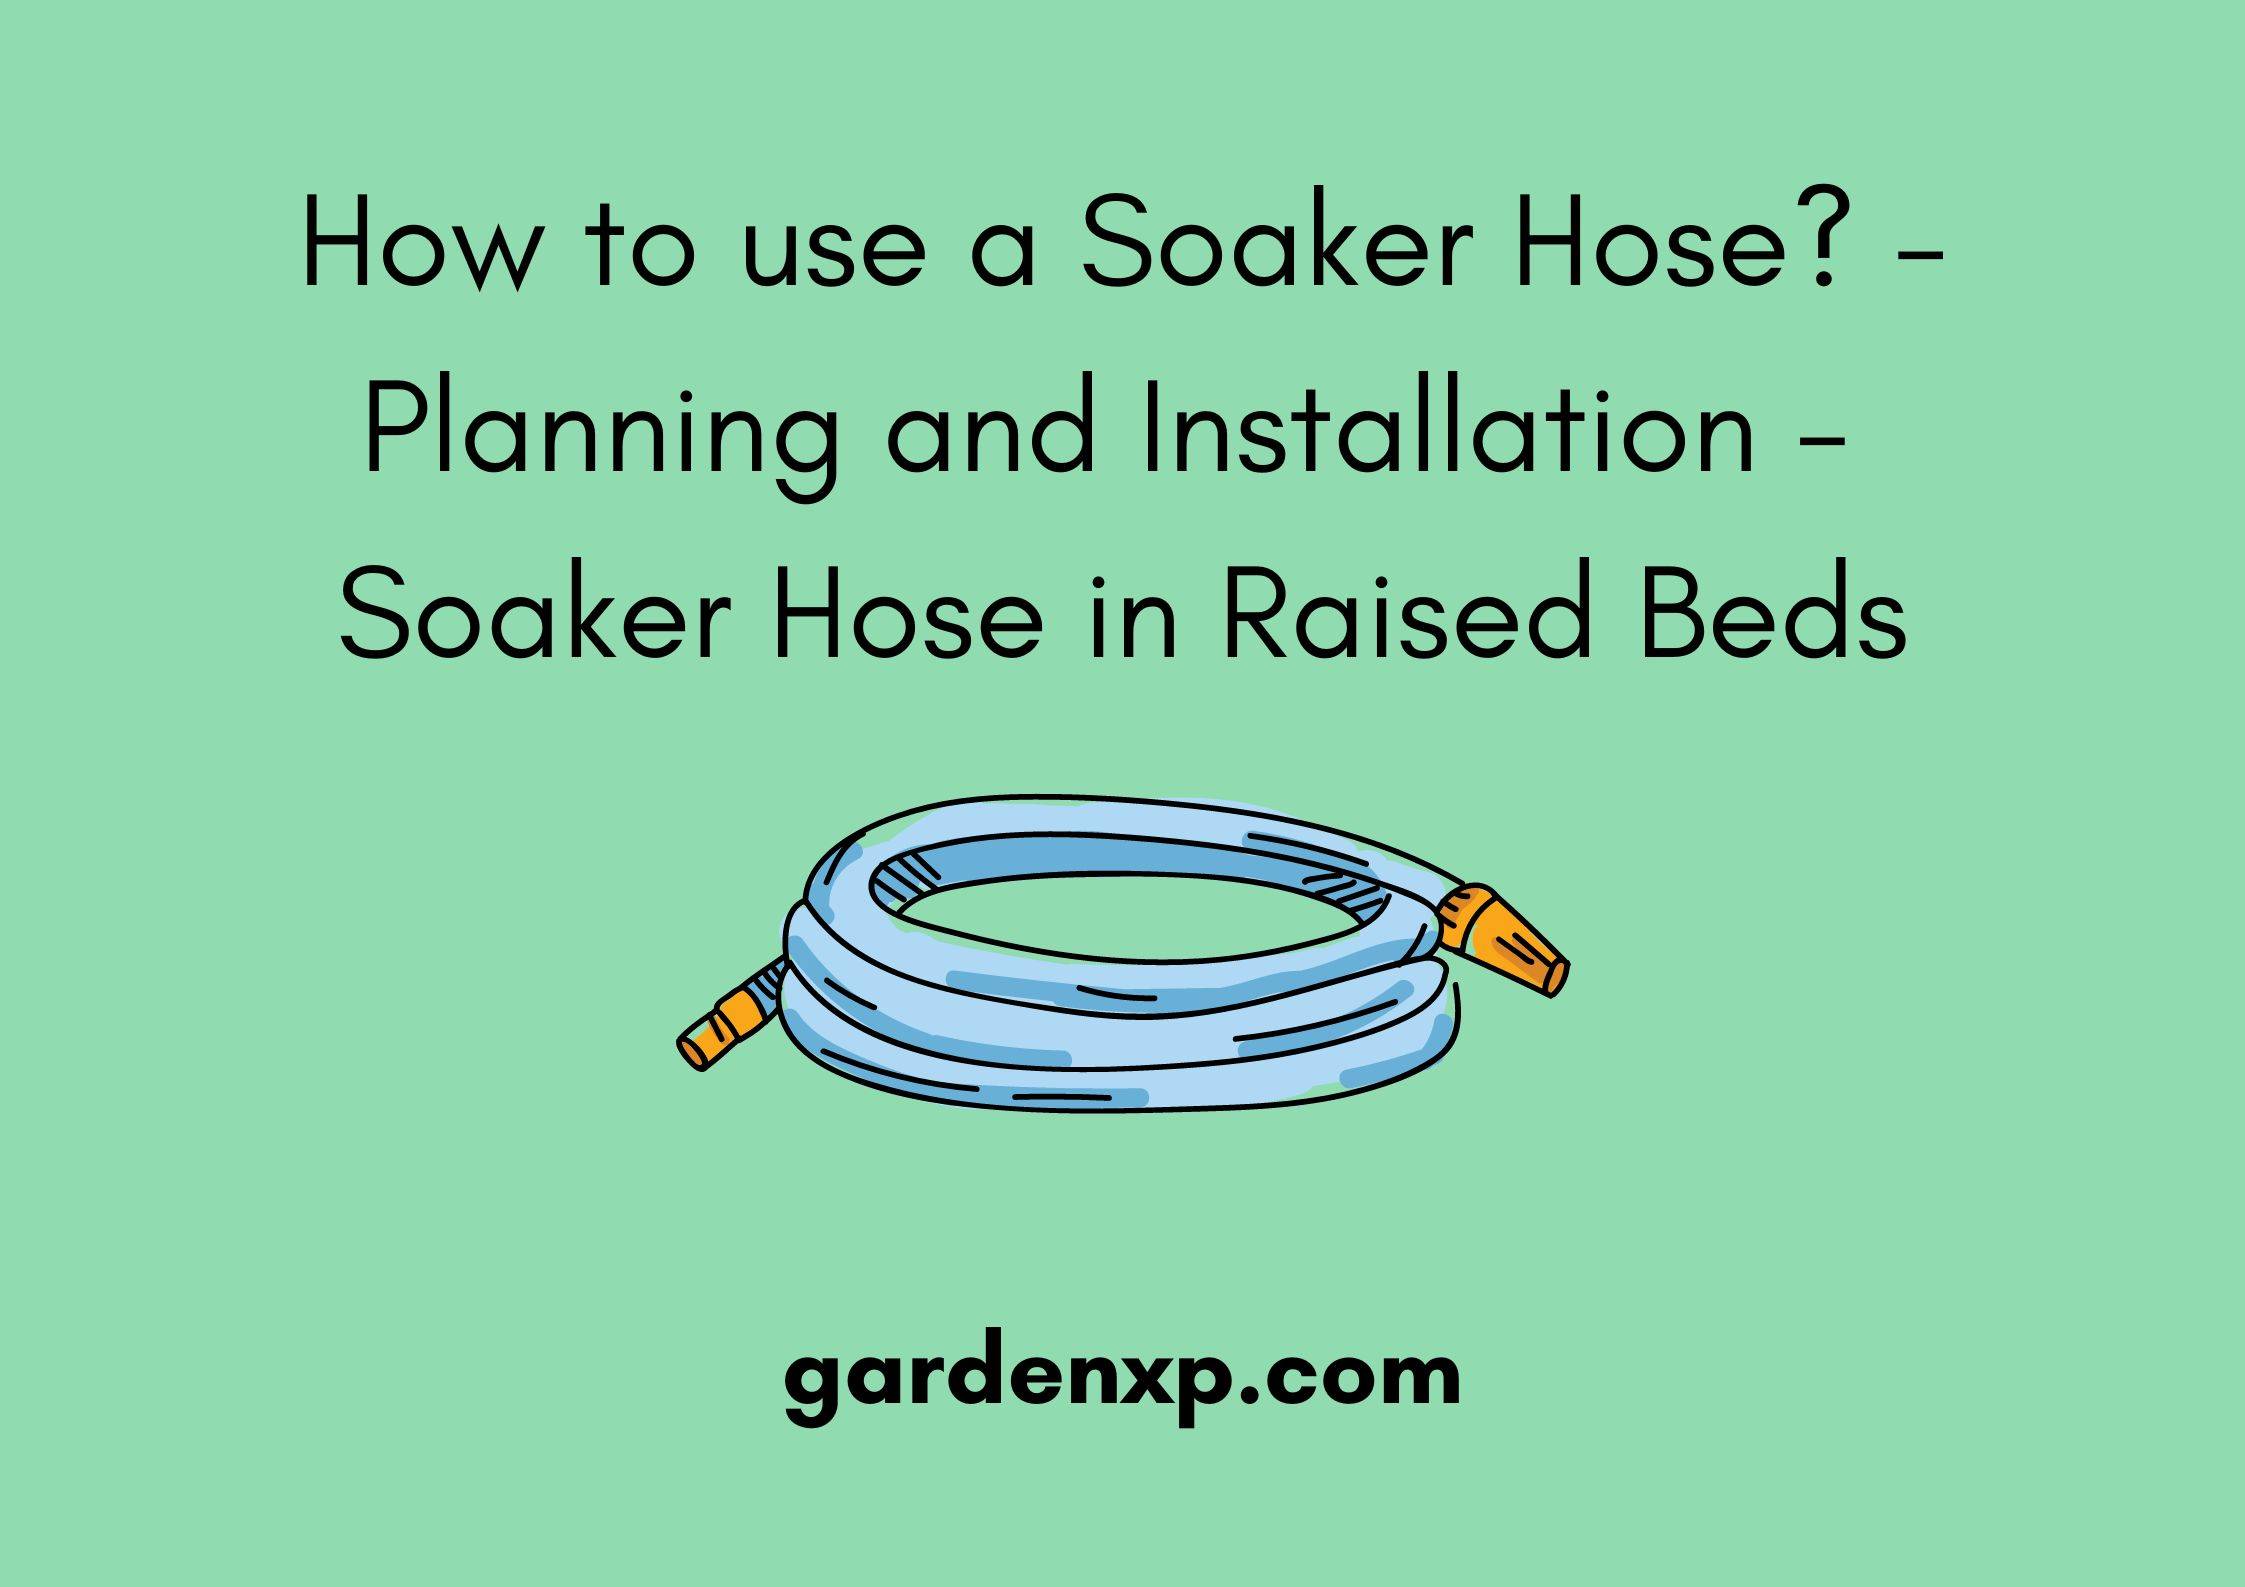 How to use a Soaker Hose? - Planning and Installation - Soaker Hose in Raised Beds